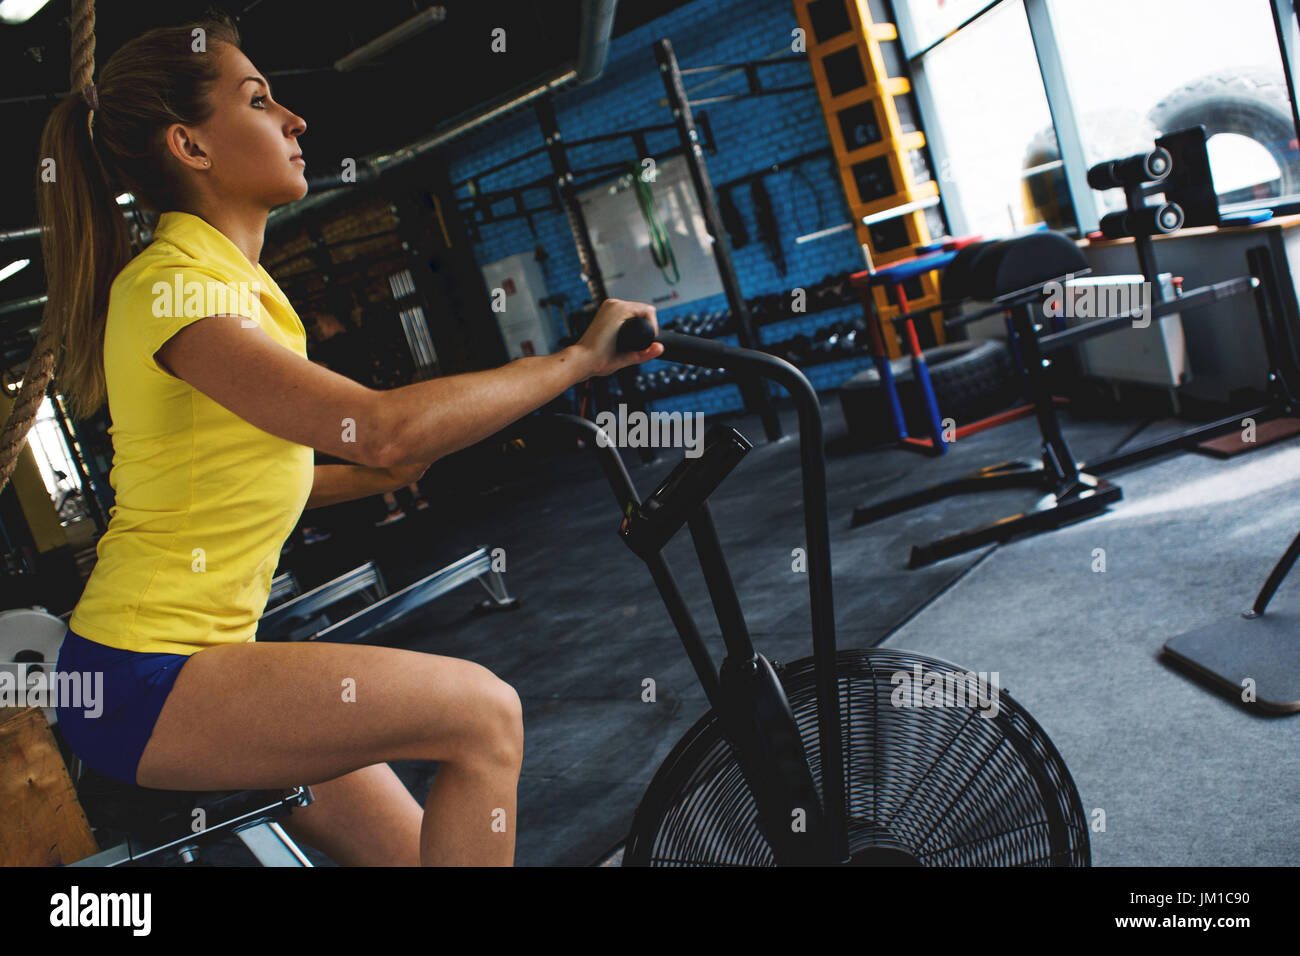 Cardio workout on a stationary bike. Girl in fitness club. Stock Photo